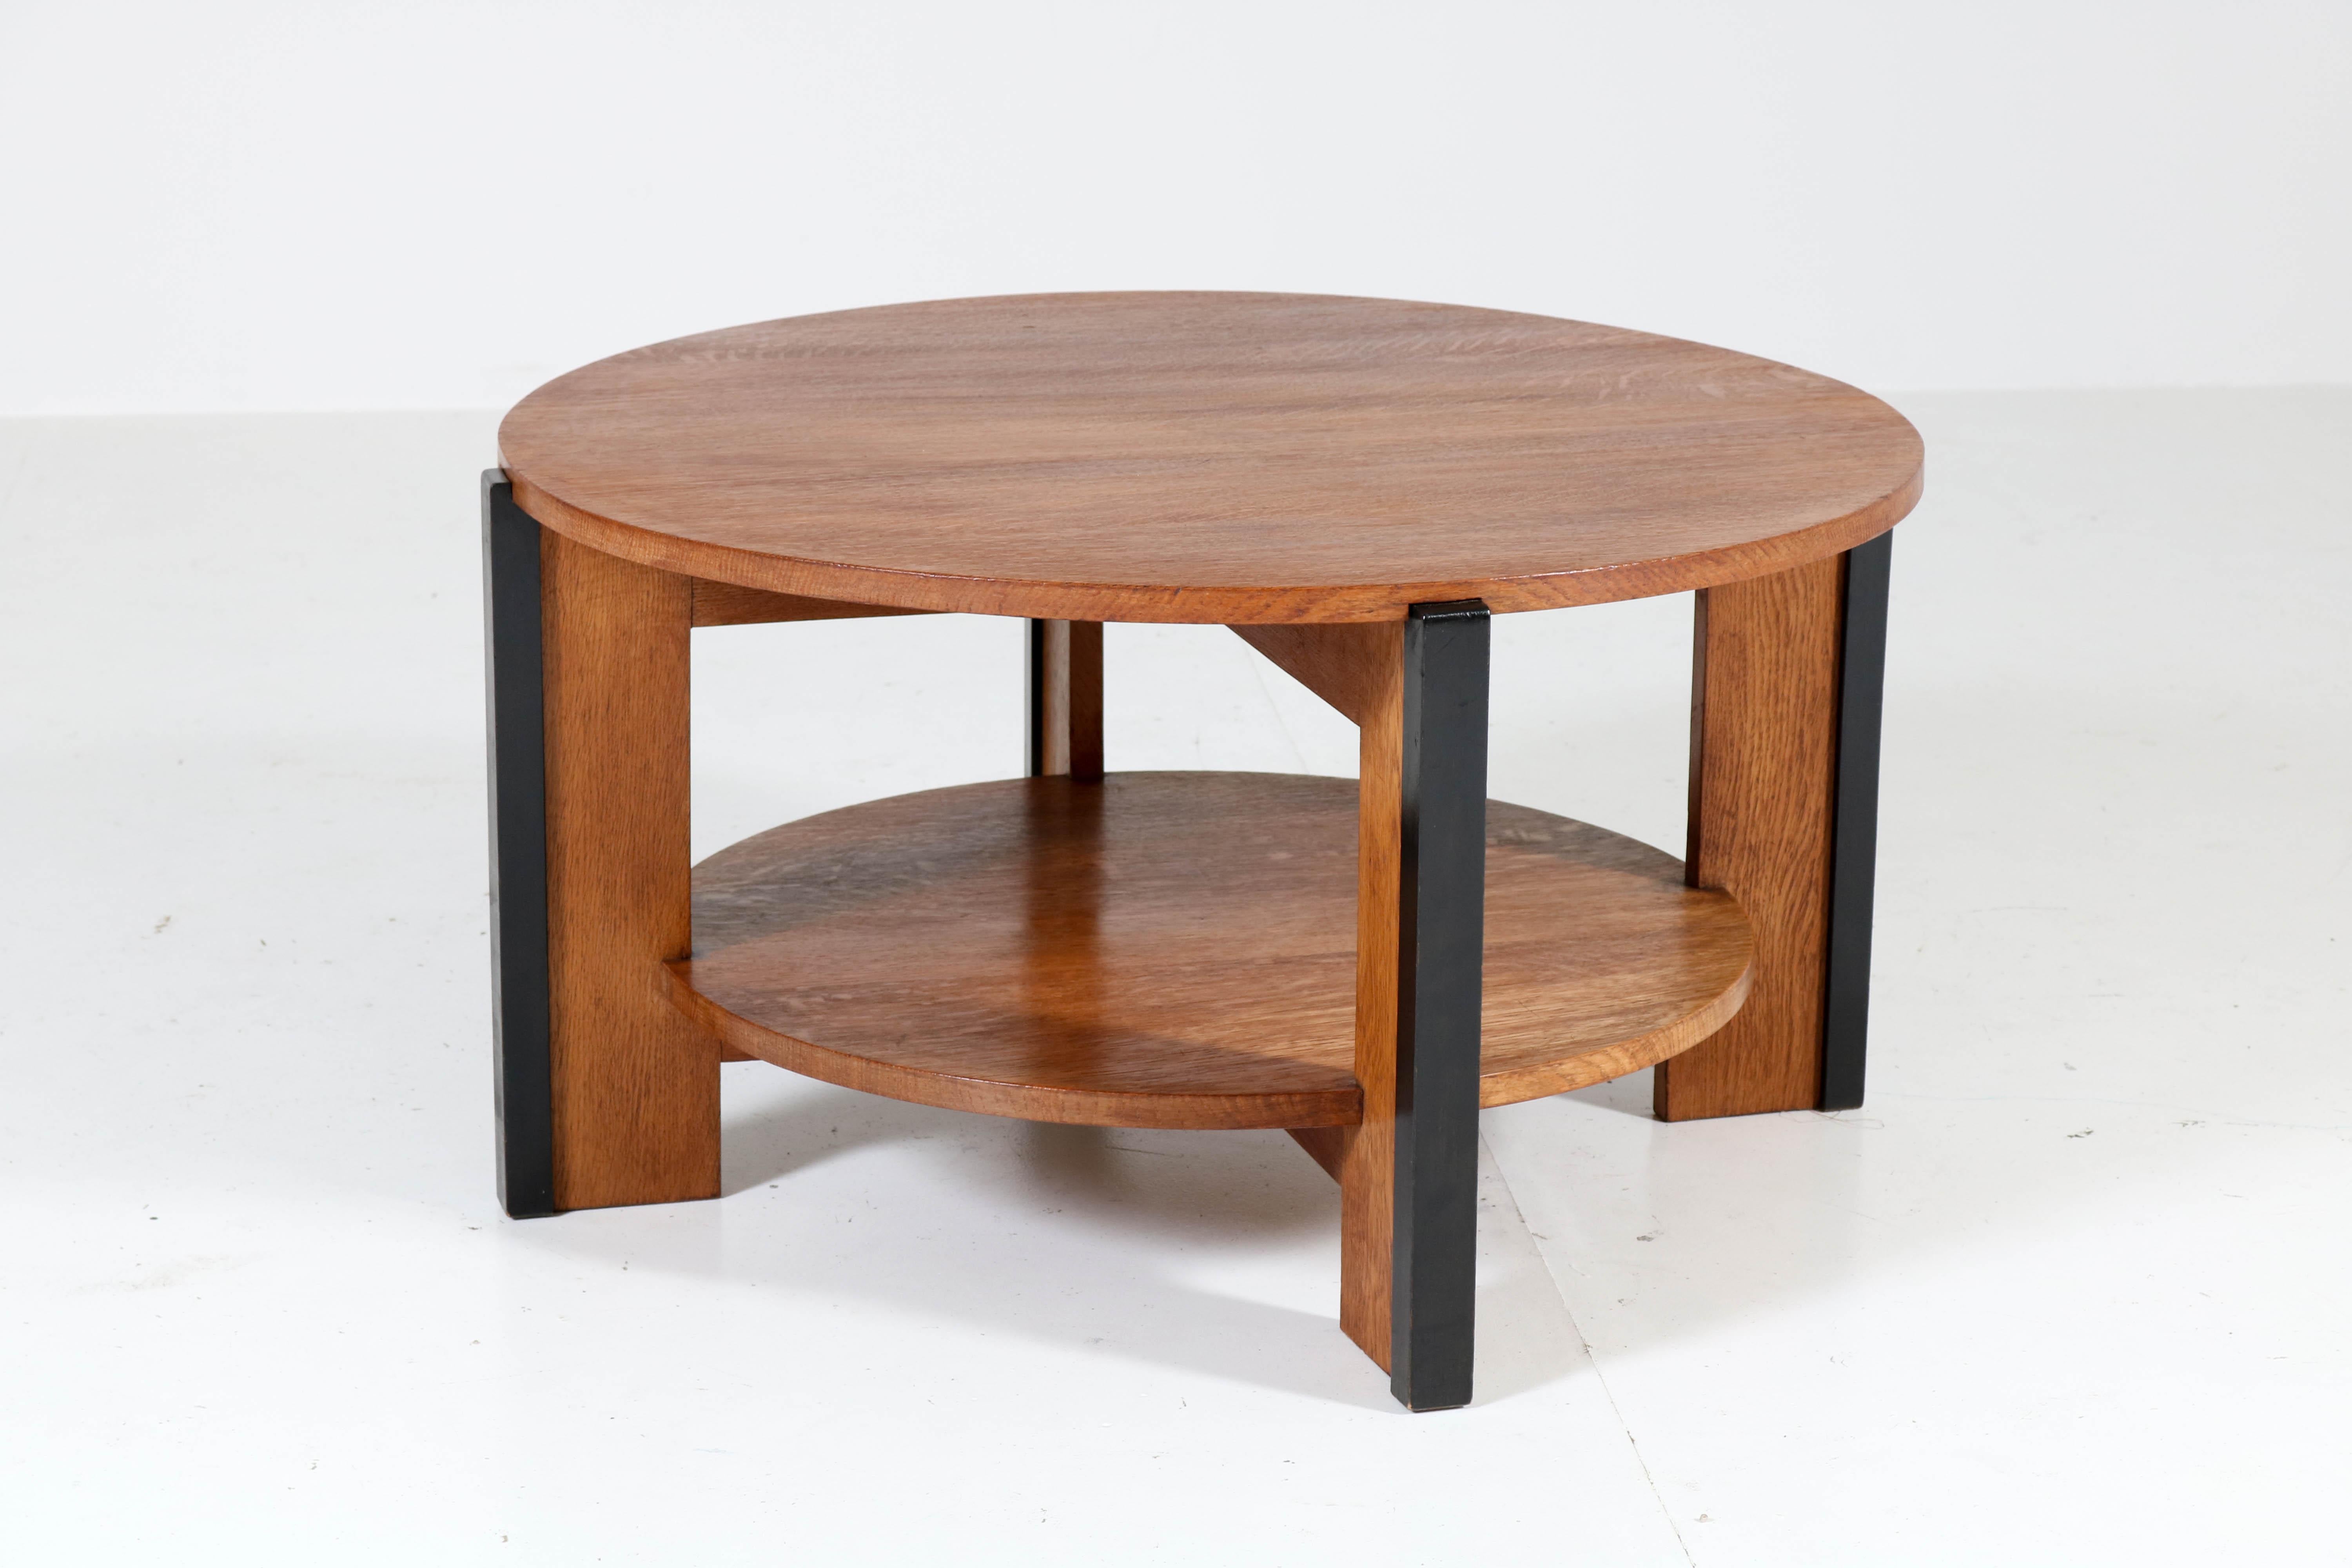 Stunning and rare Art Deco Haagse School coffee table.
Design by Jan Brunott.
Striking Dutch design from the twenties.
Solid oak with original black lacquered lining.
In good original condition with minor wear consistent with age and